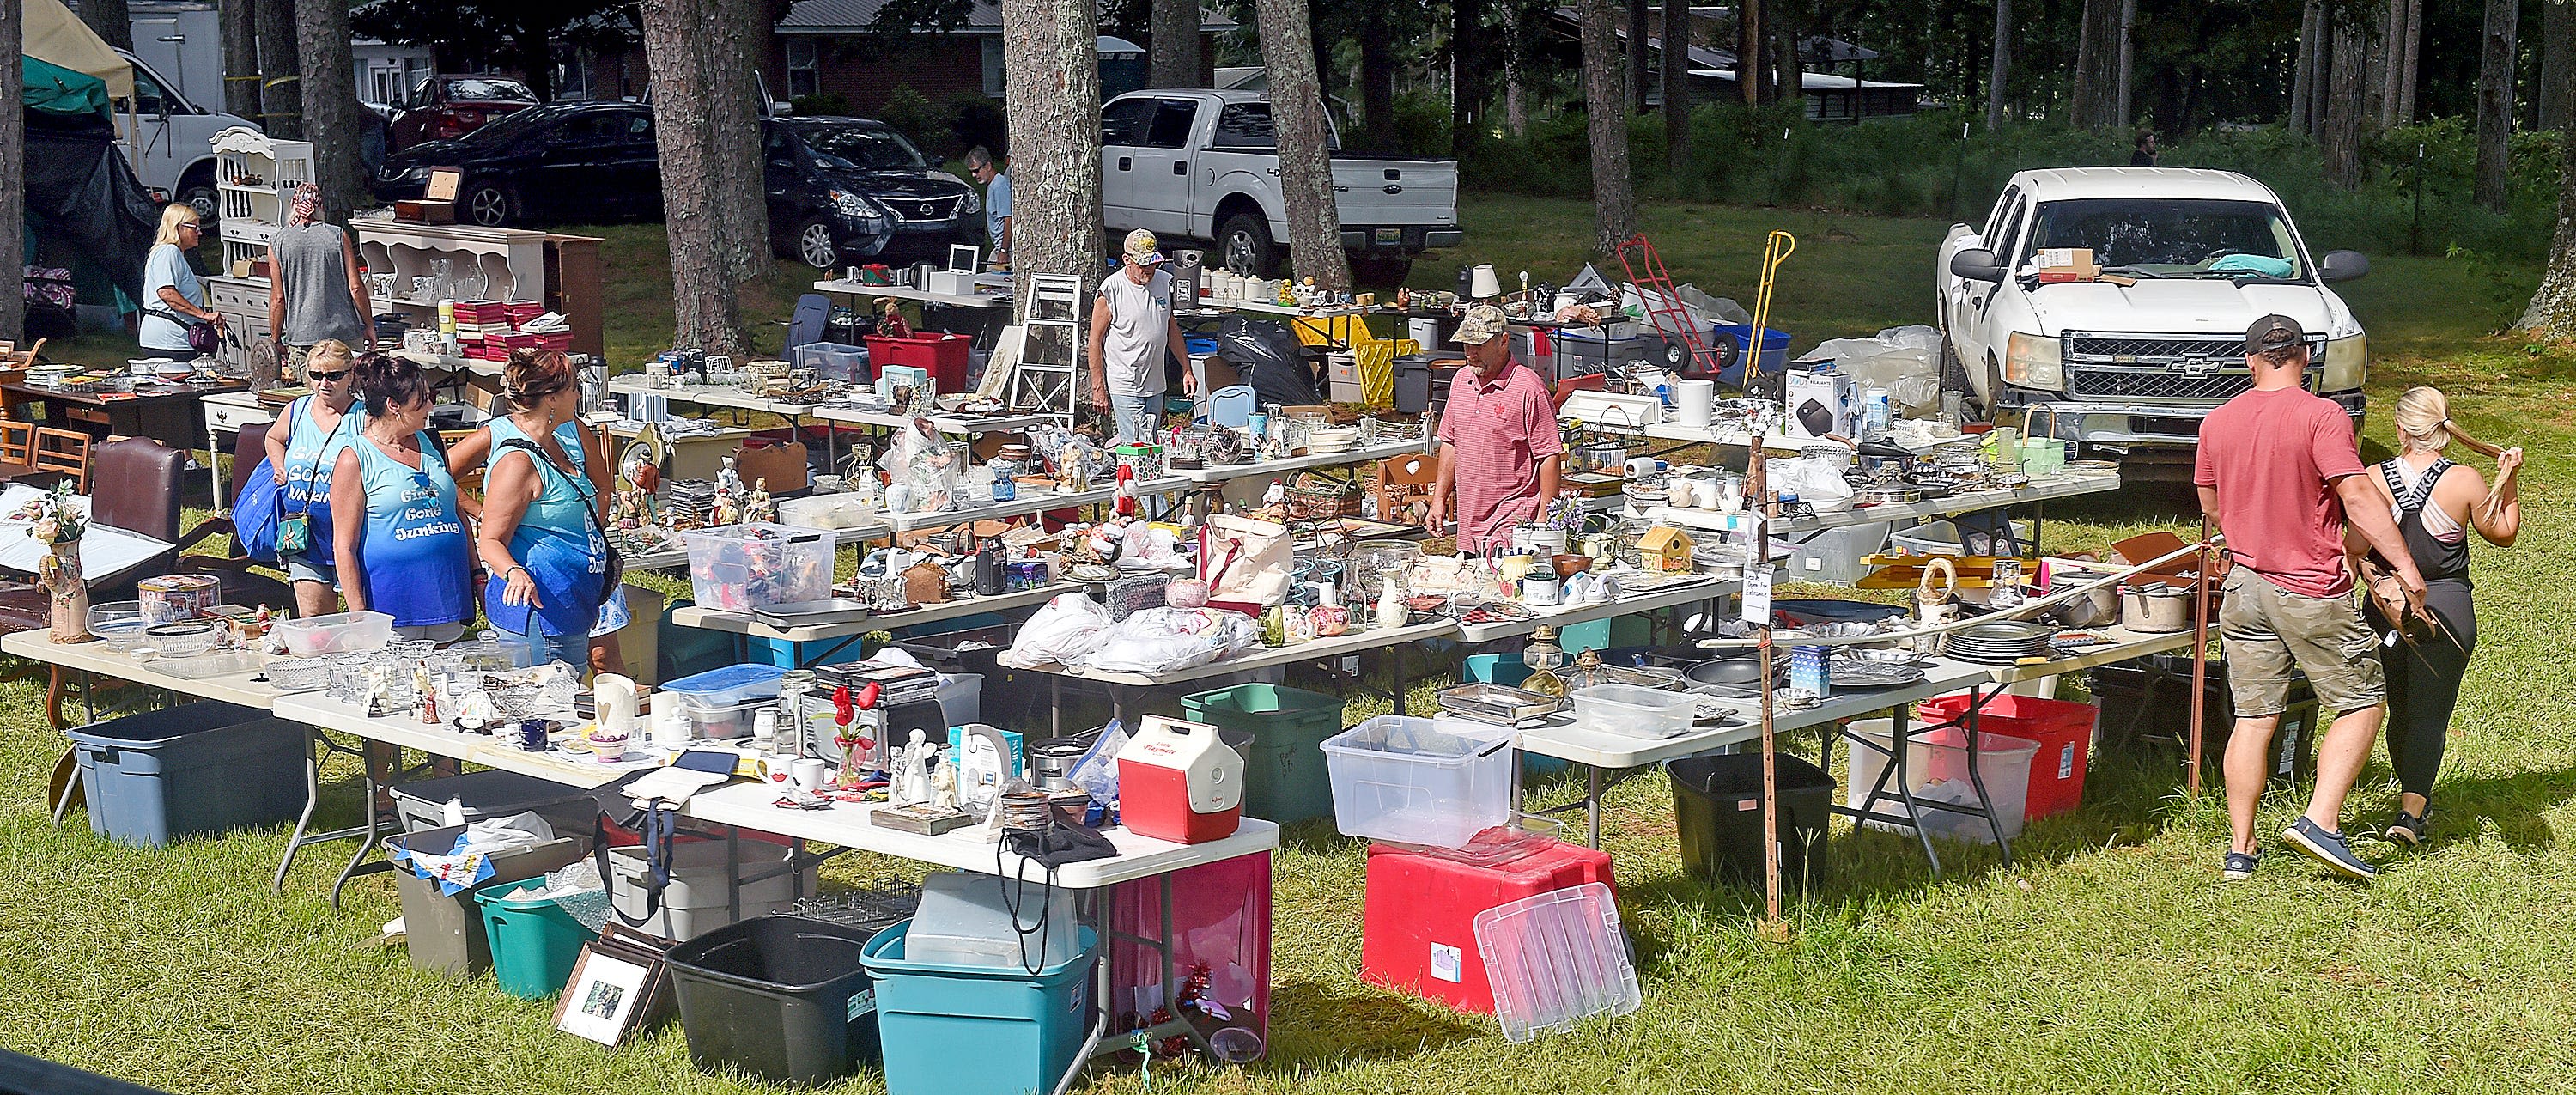 Shoppers look for treasures during World's Longest Yard Sale